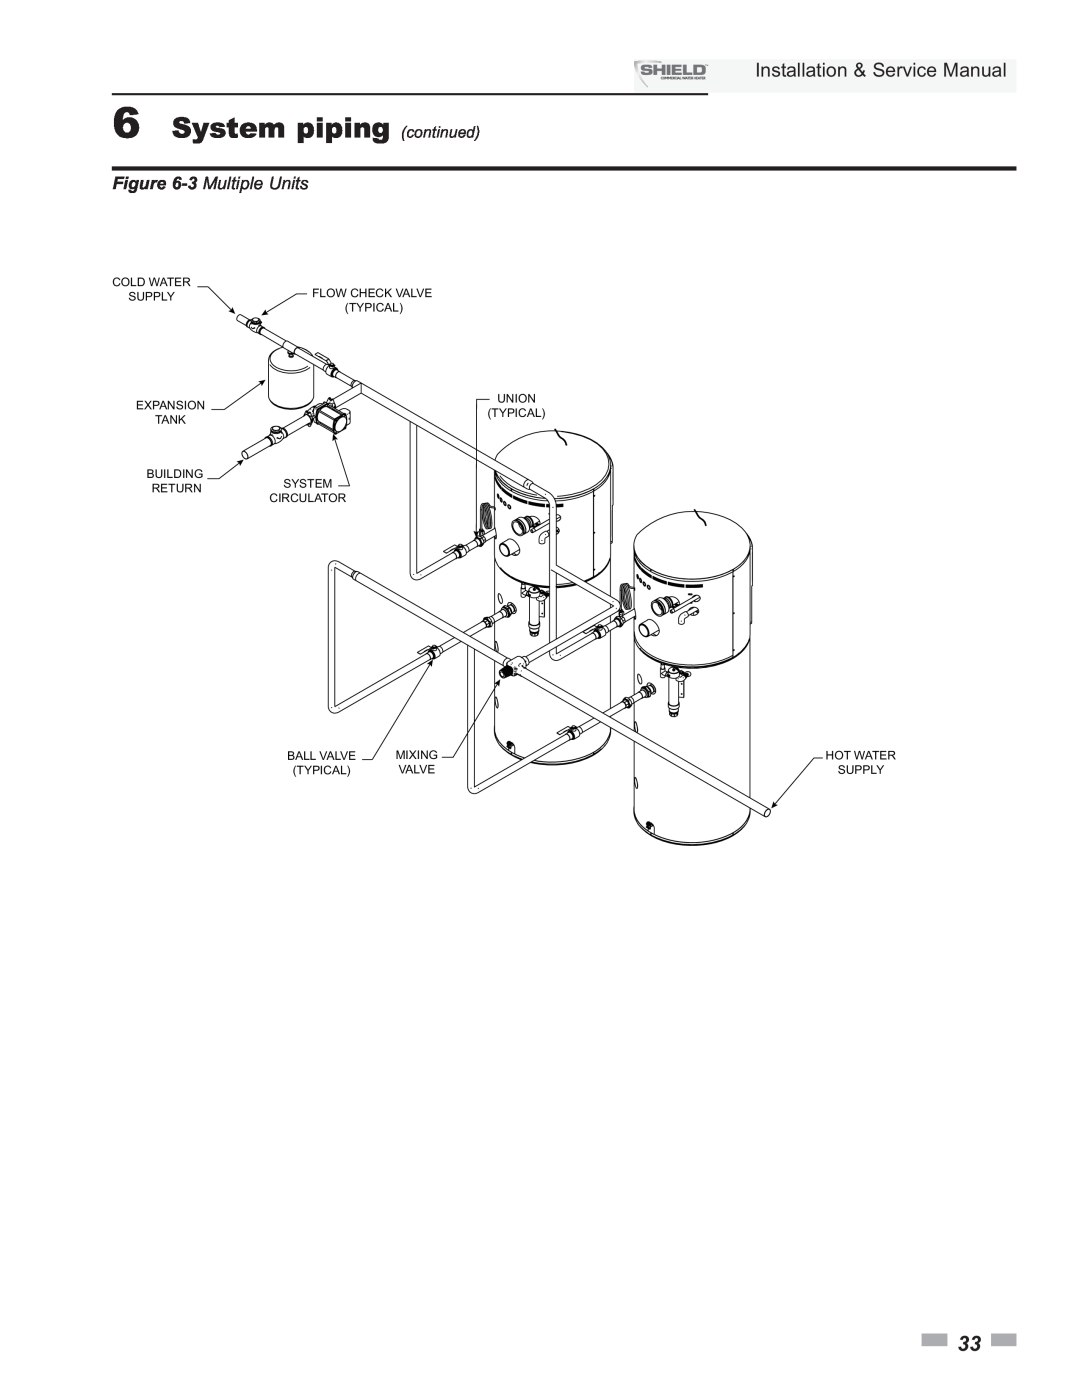 Lochinvar SNR150-100 6System piping continued, Installation & Service Manual, 3 Multiple Units, Expansion, Union, Tank 